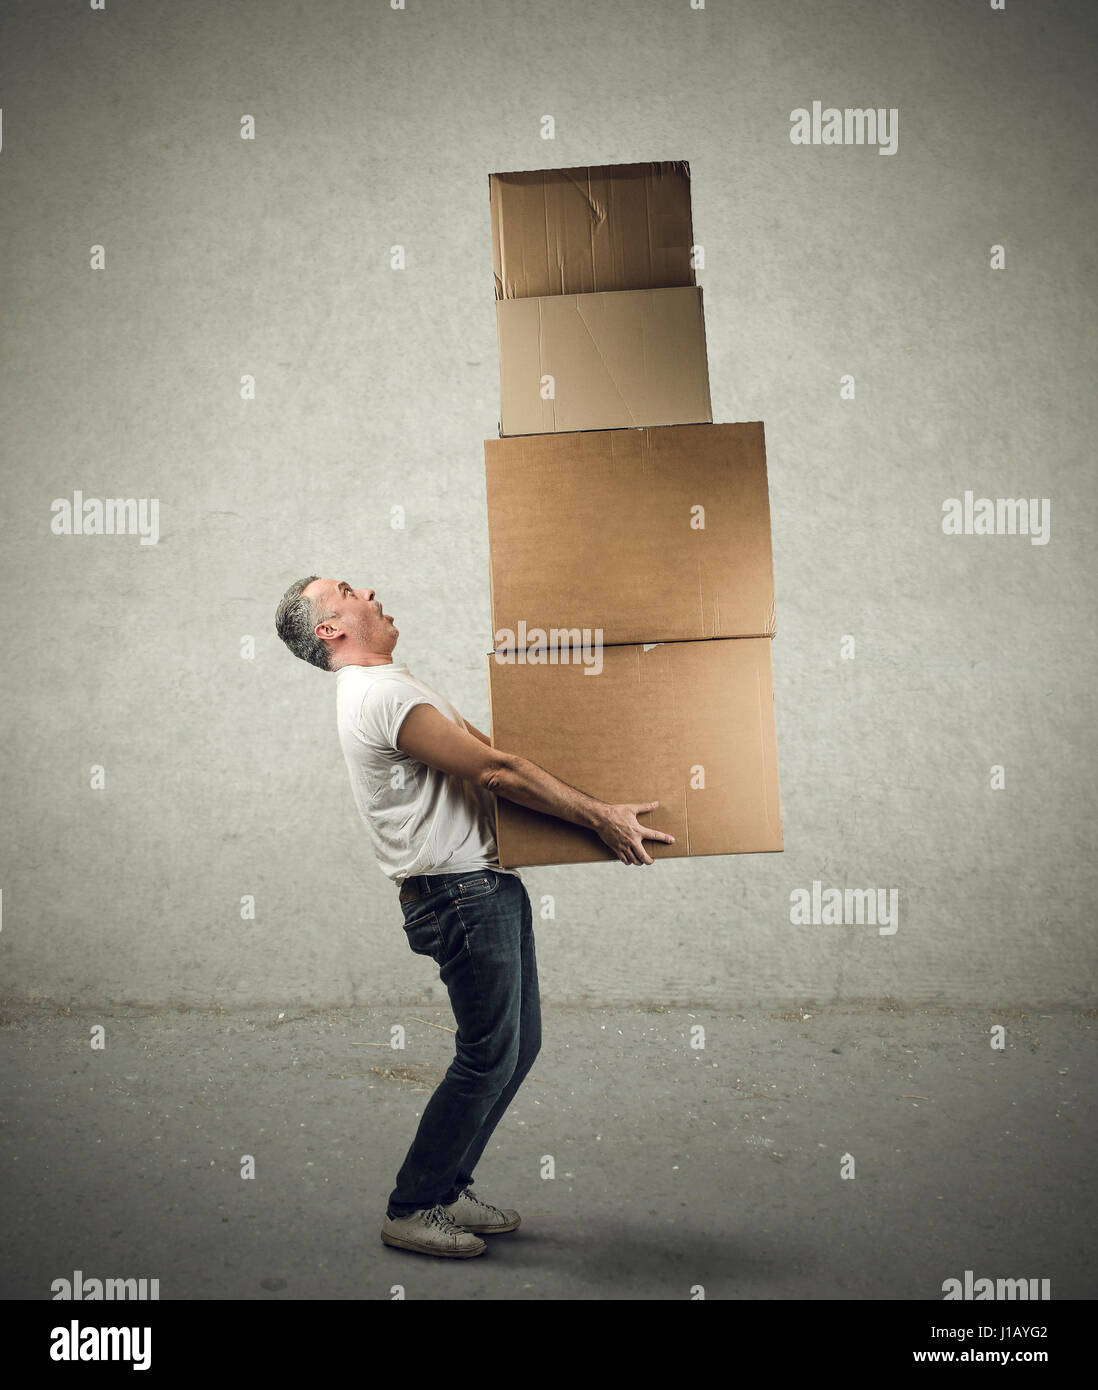 Man carrying heavy boxes Stock Photo